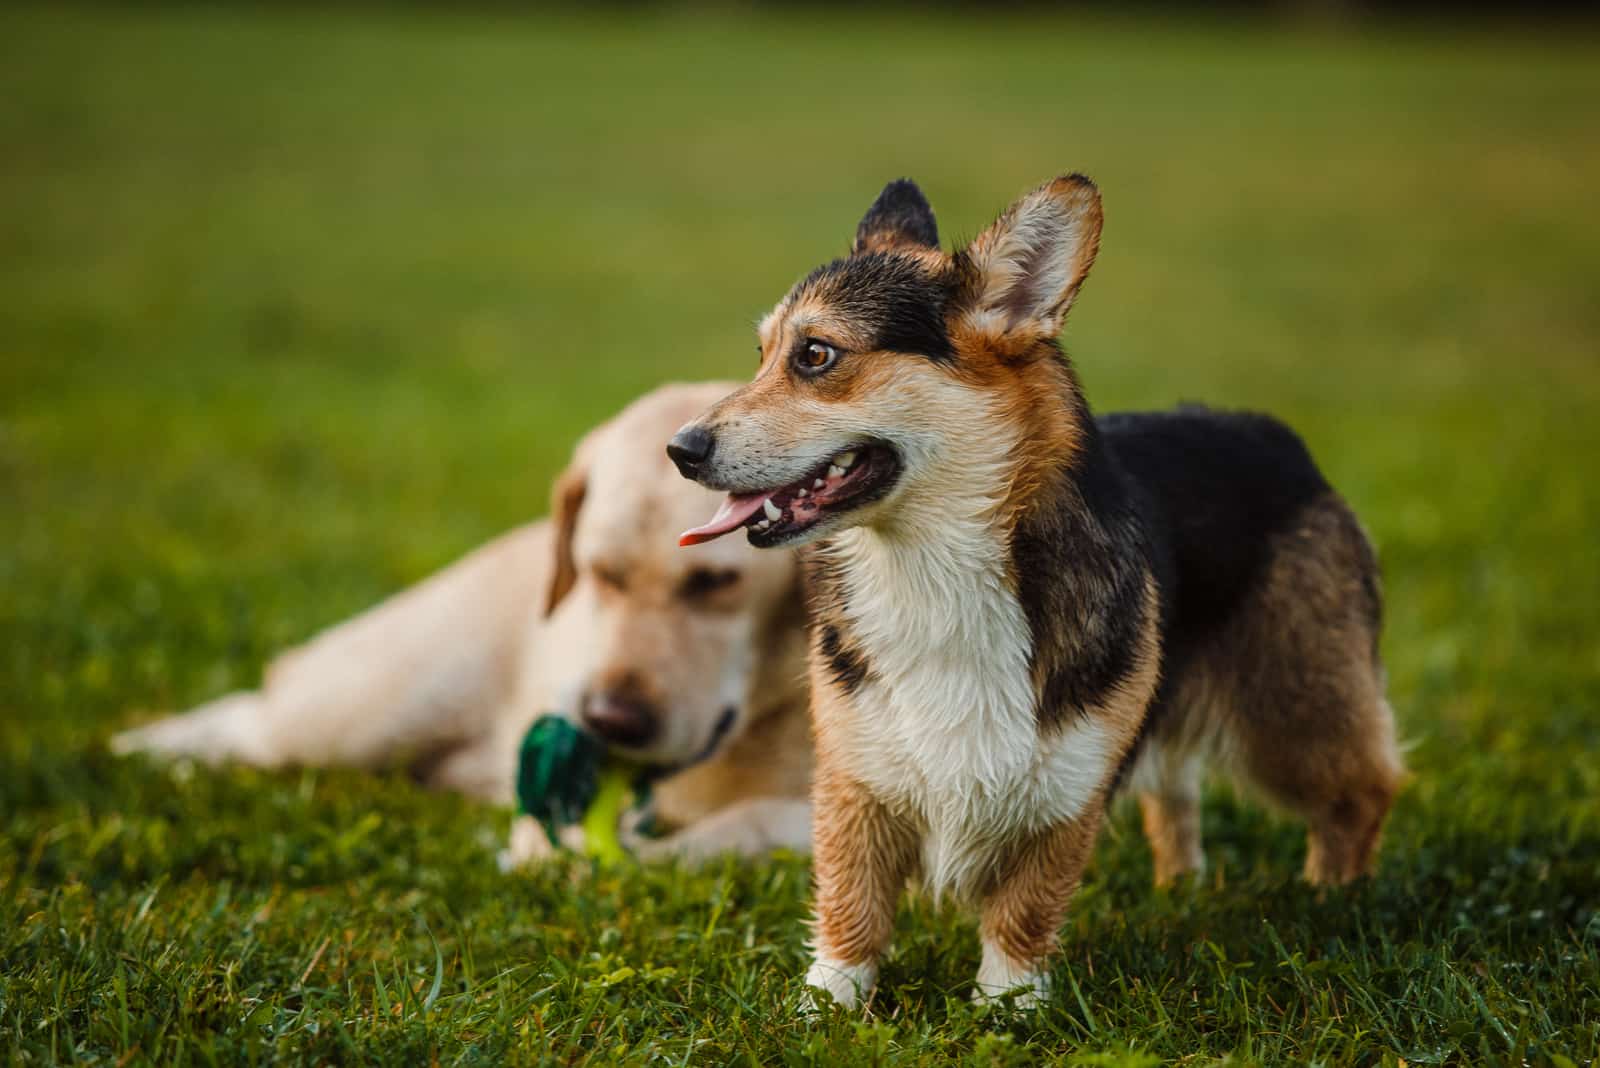 Corgi and the Labrador are playing on the lawn